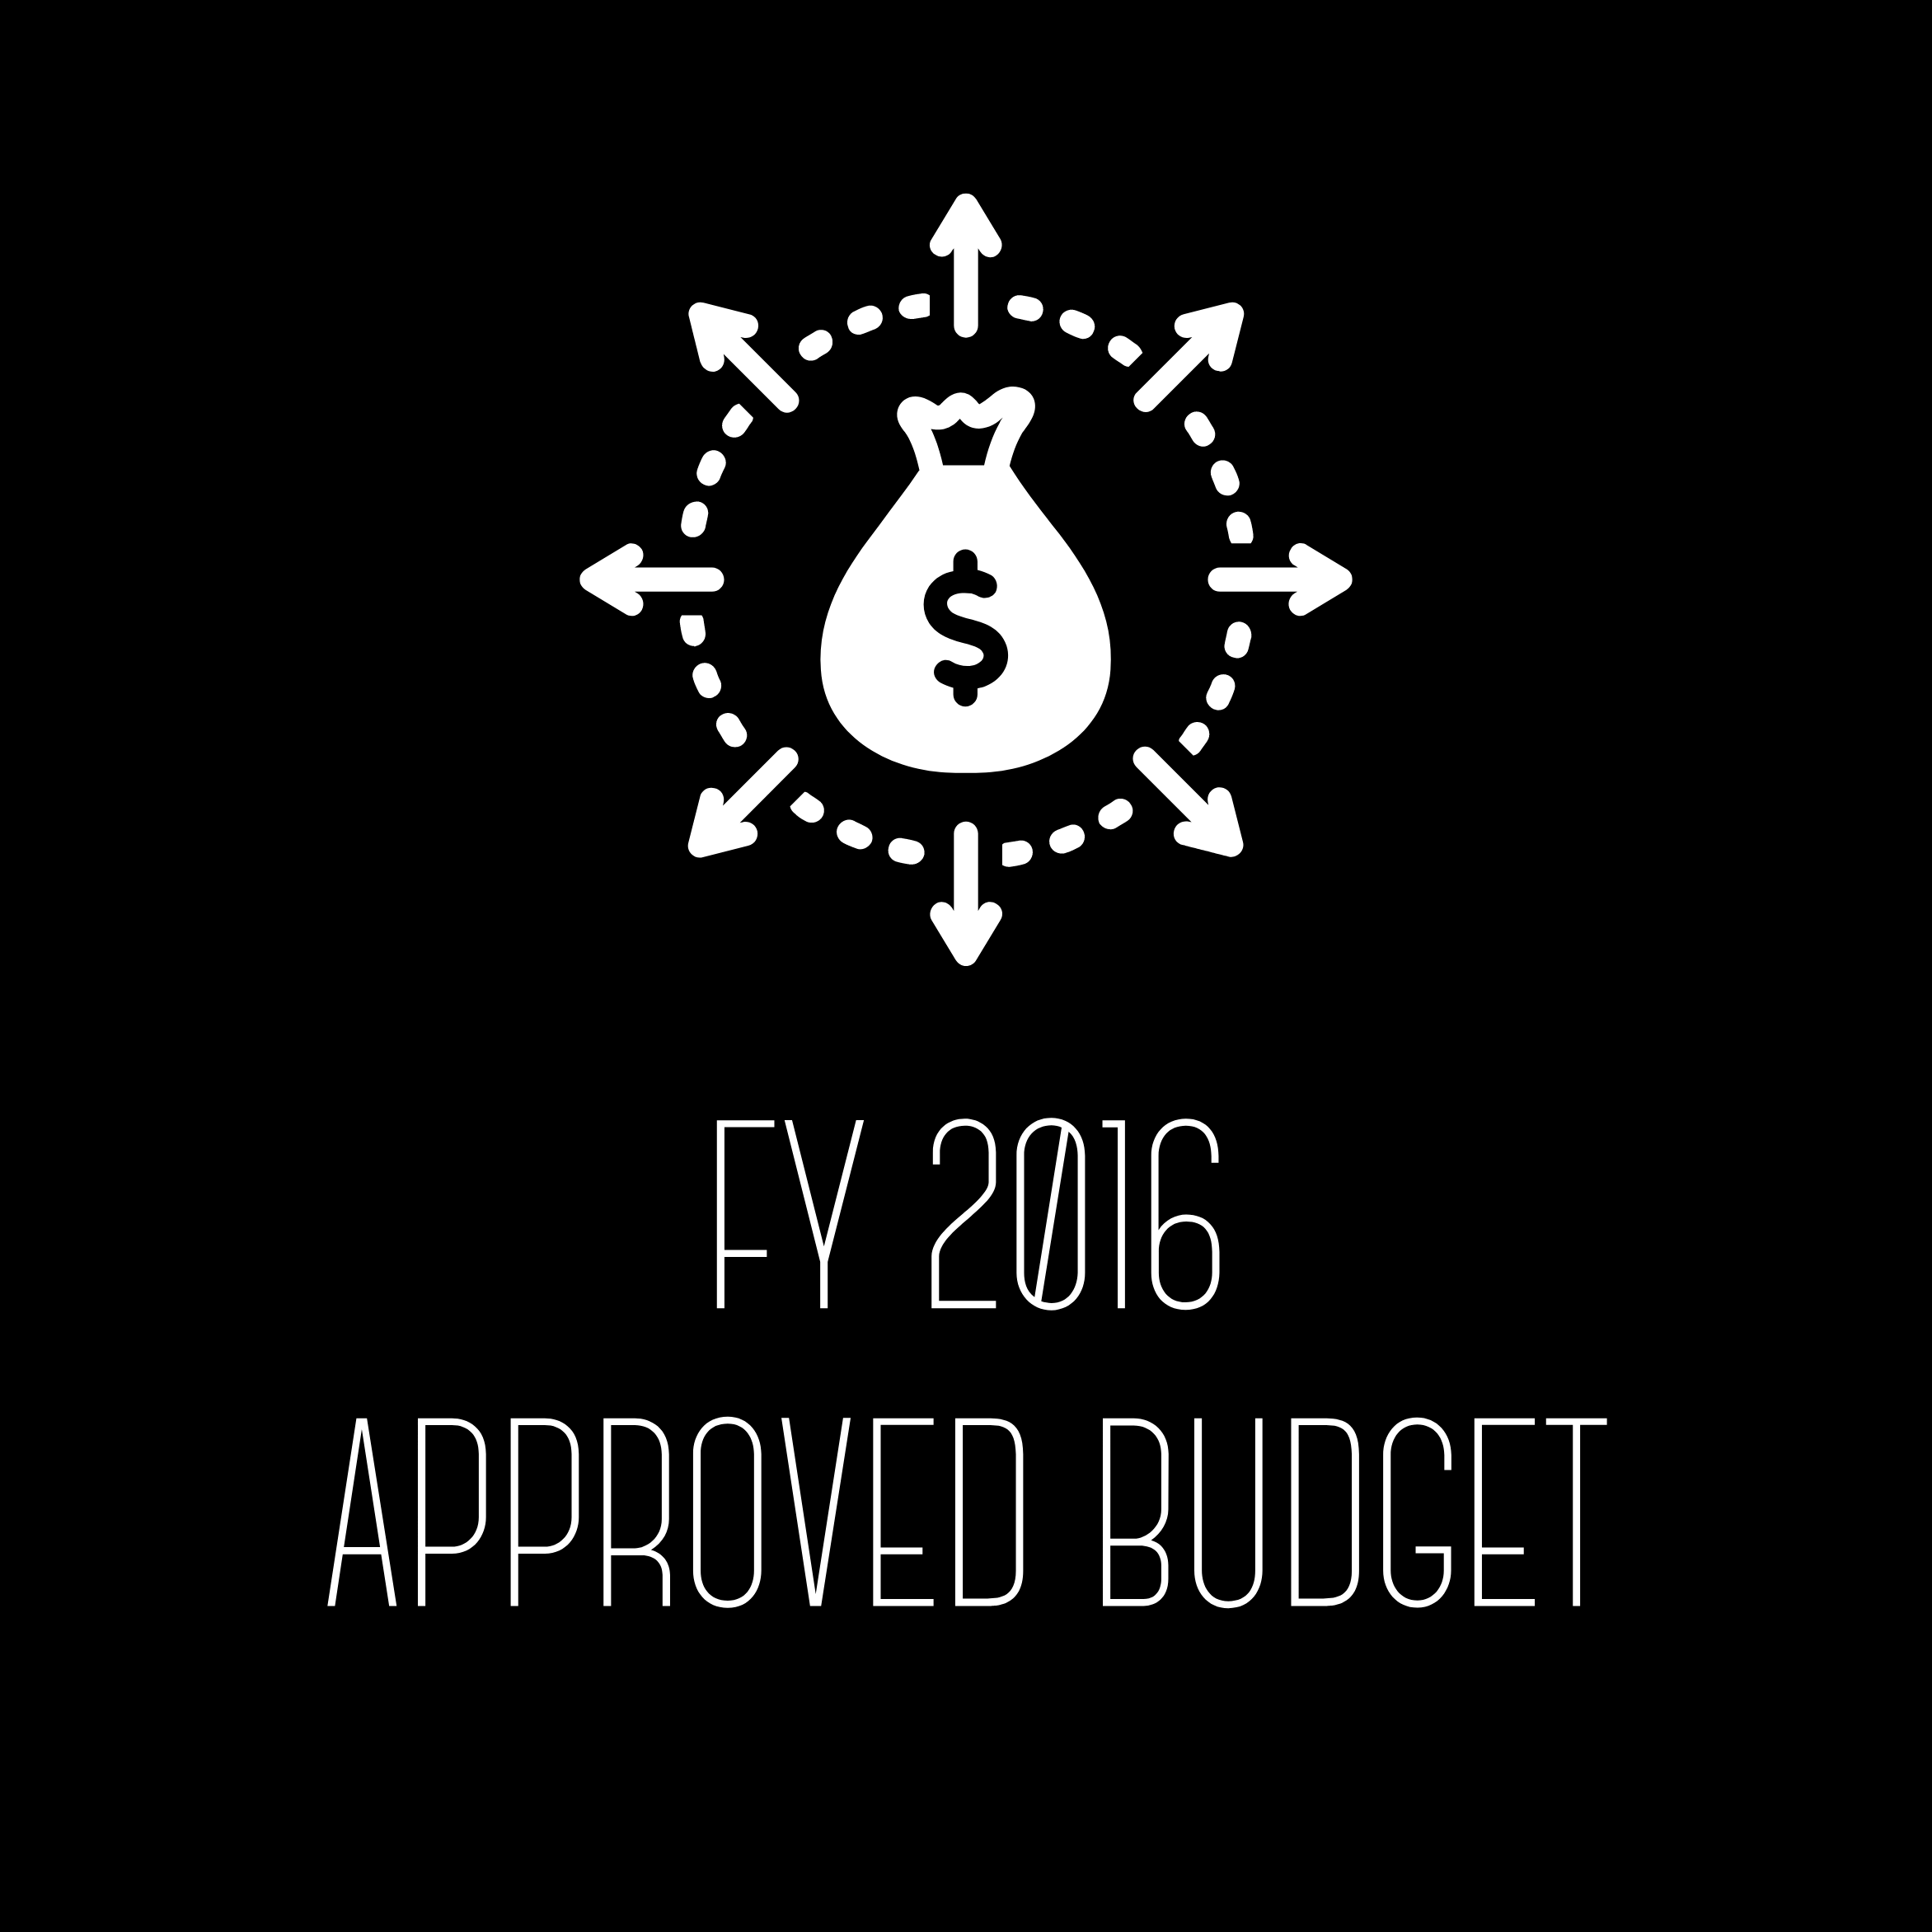 FY 2016 Approved Budget